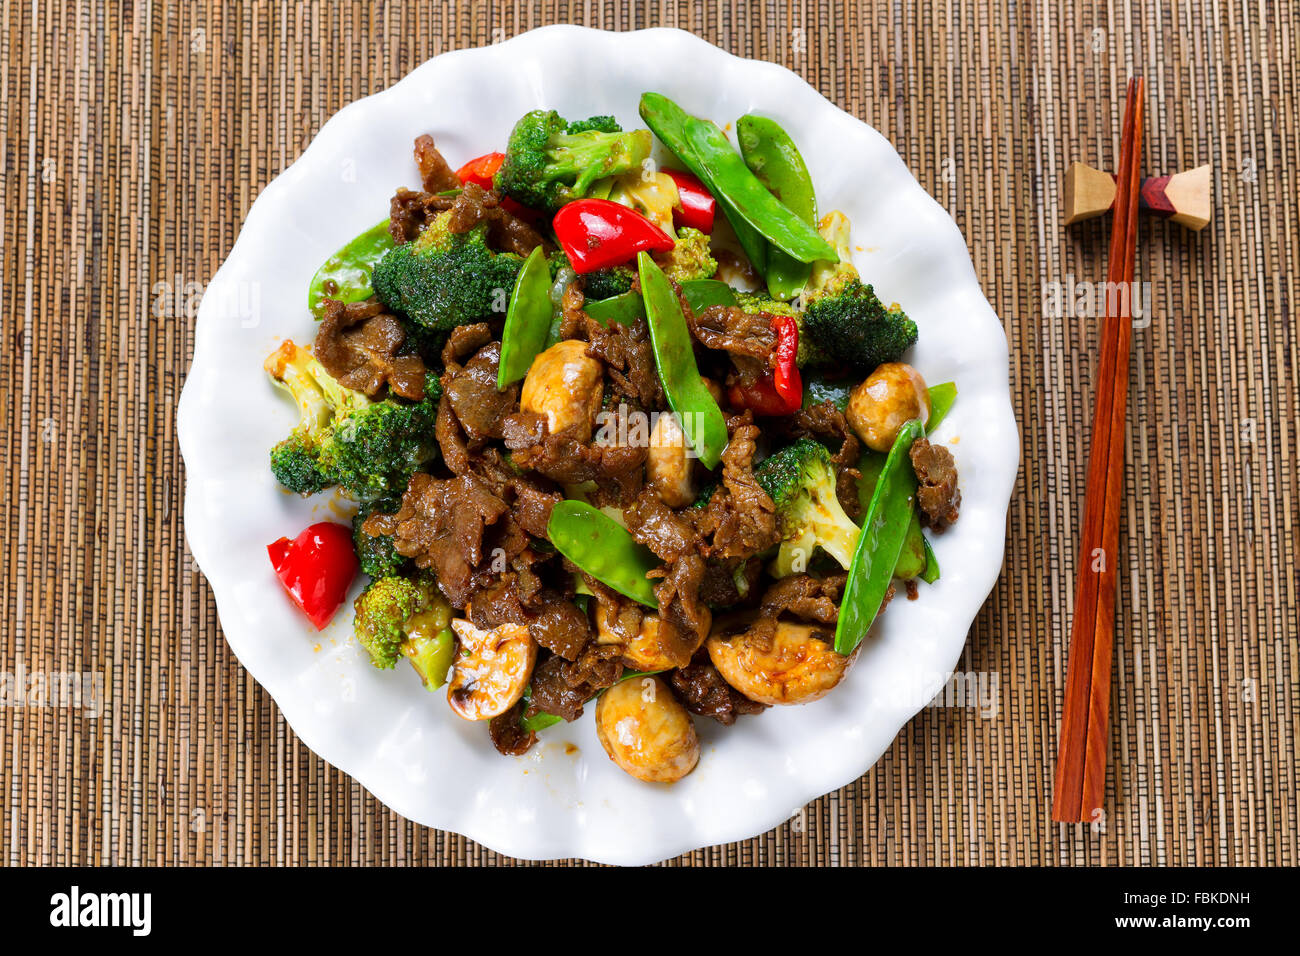 High angle view of tender beef slices, mushrooms, broccoli, peppers and peas in white plate. Stock Photo